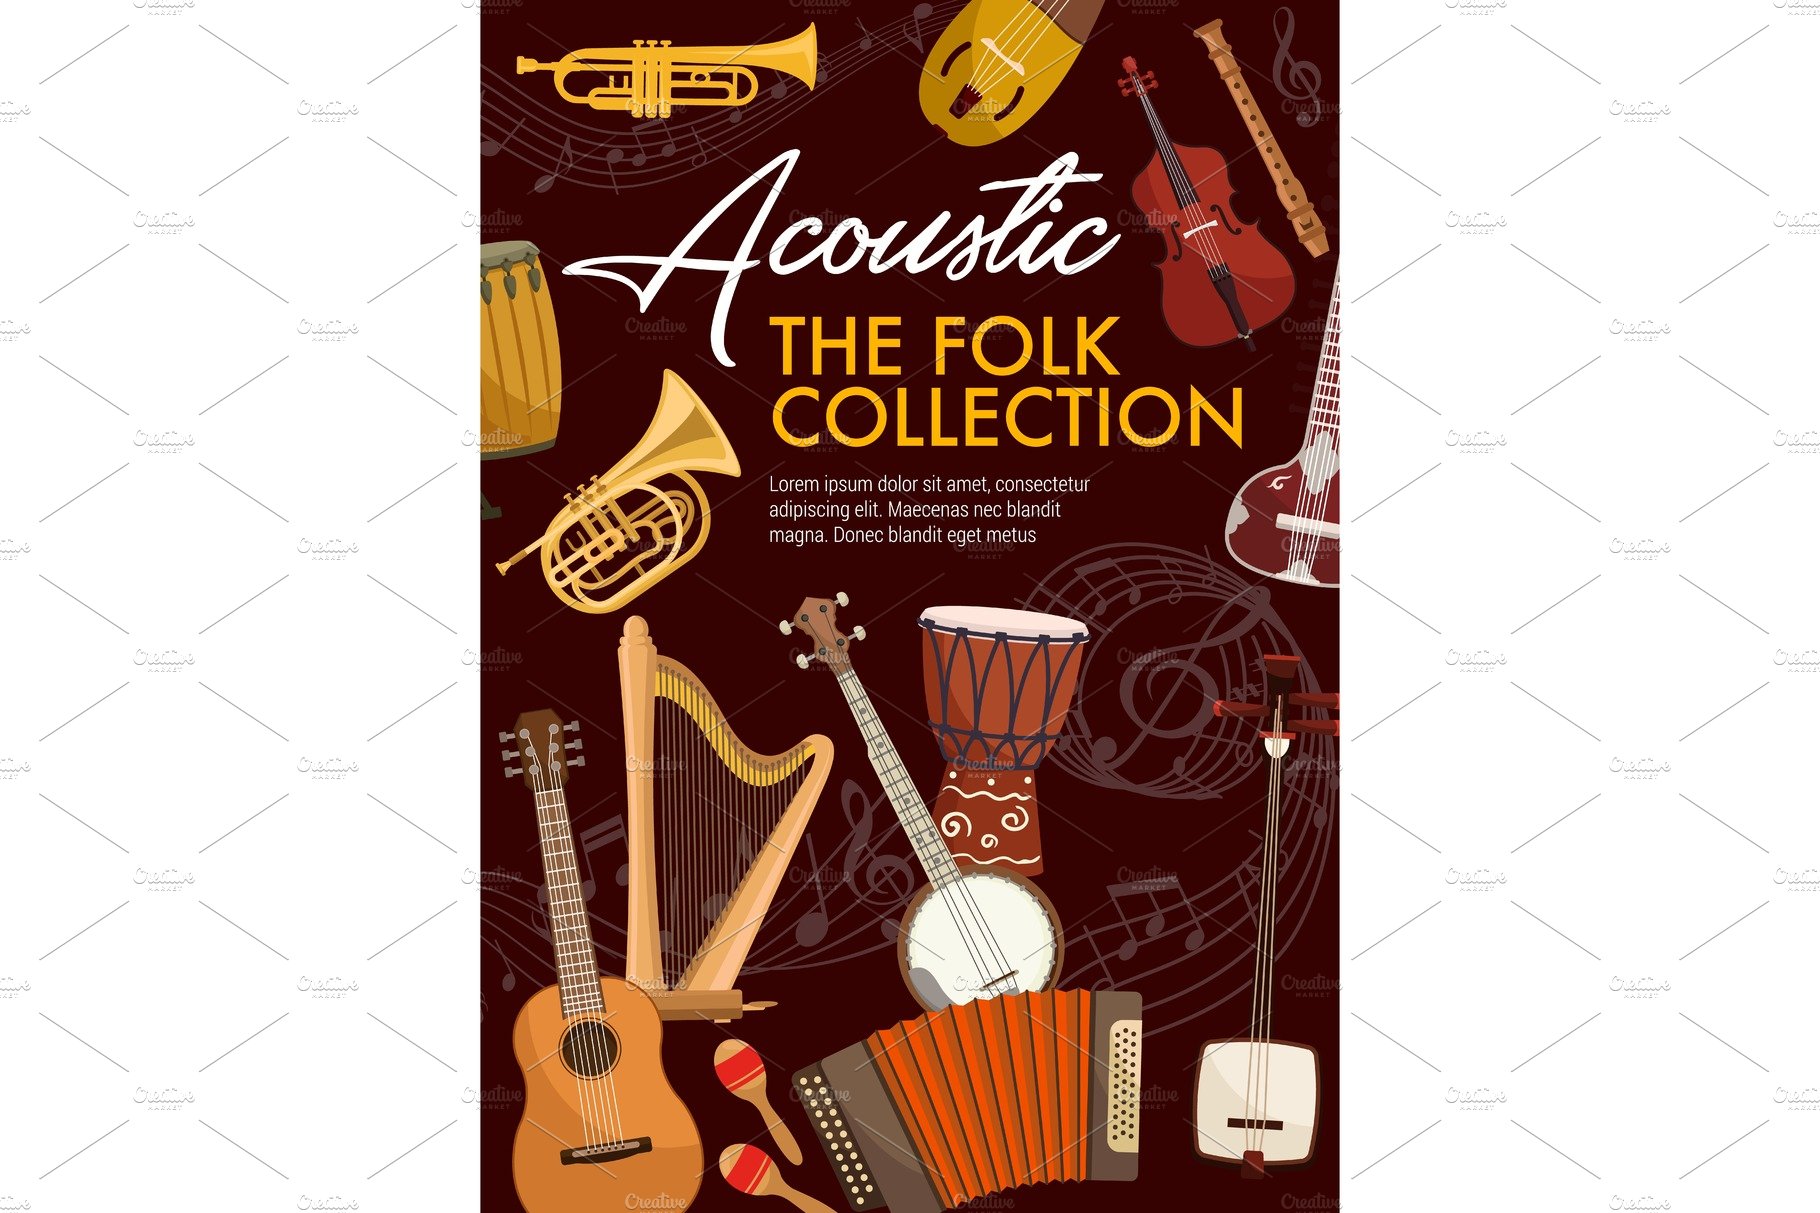 Acoustic musical instruments, music cover image.